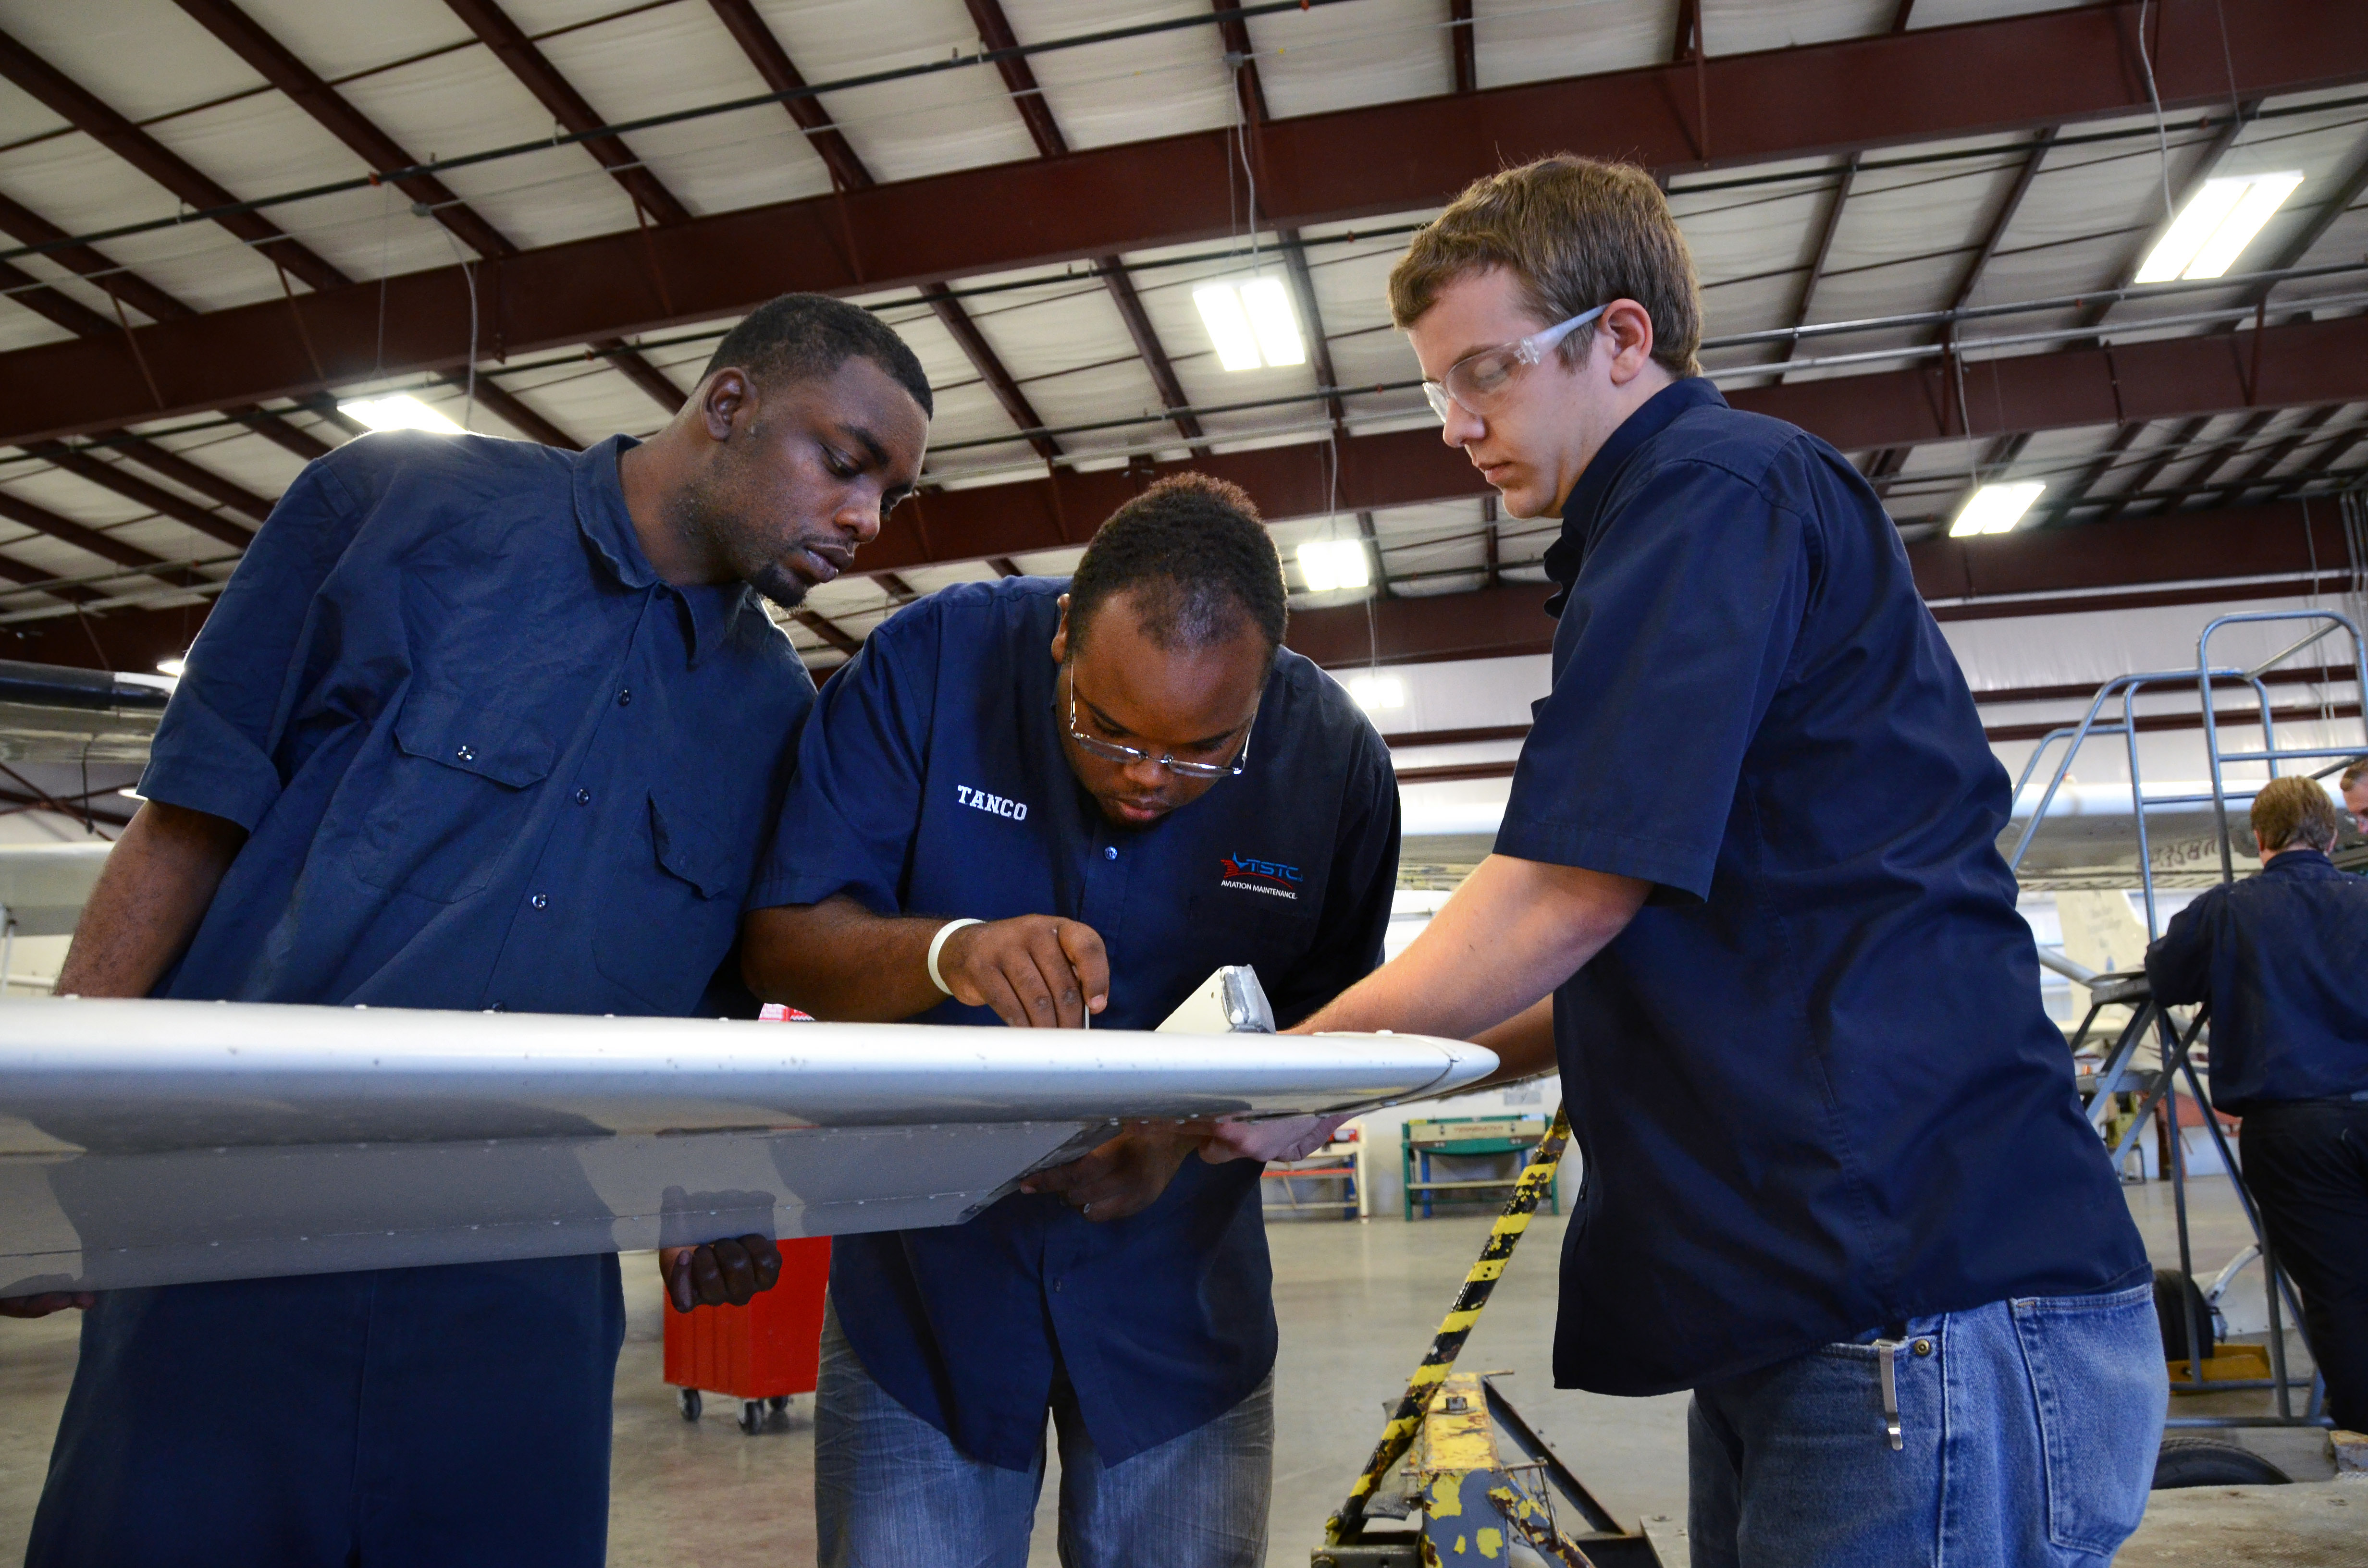 Texas State Technical College A&P mechanics work on an aircraft's tail section. Photo courtesy of Texas State Technical College.